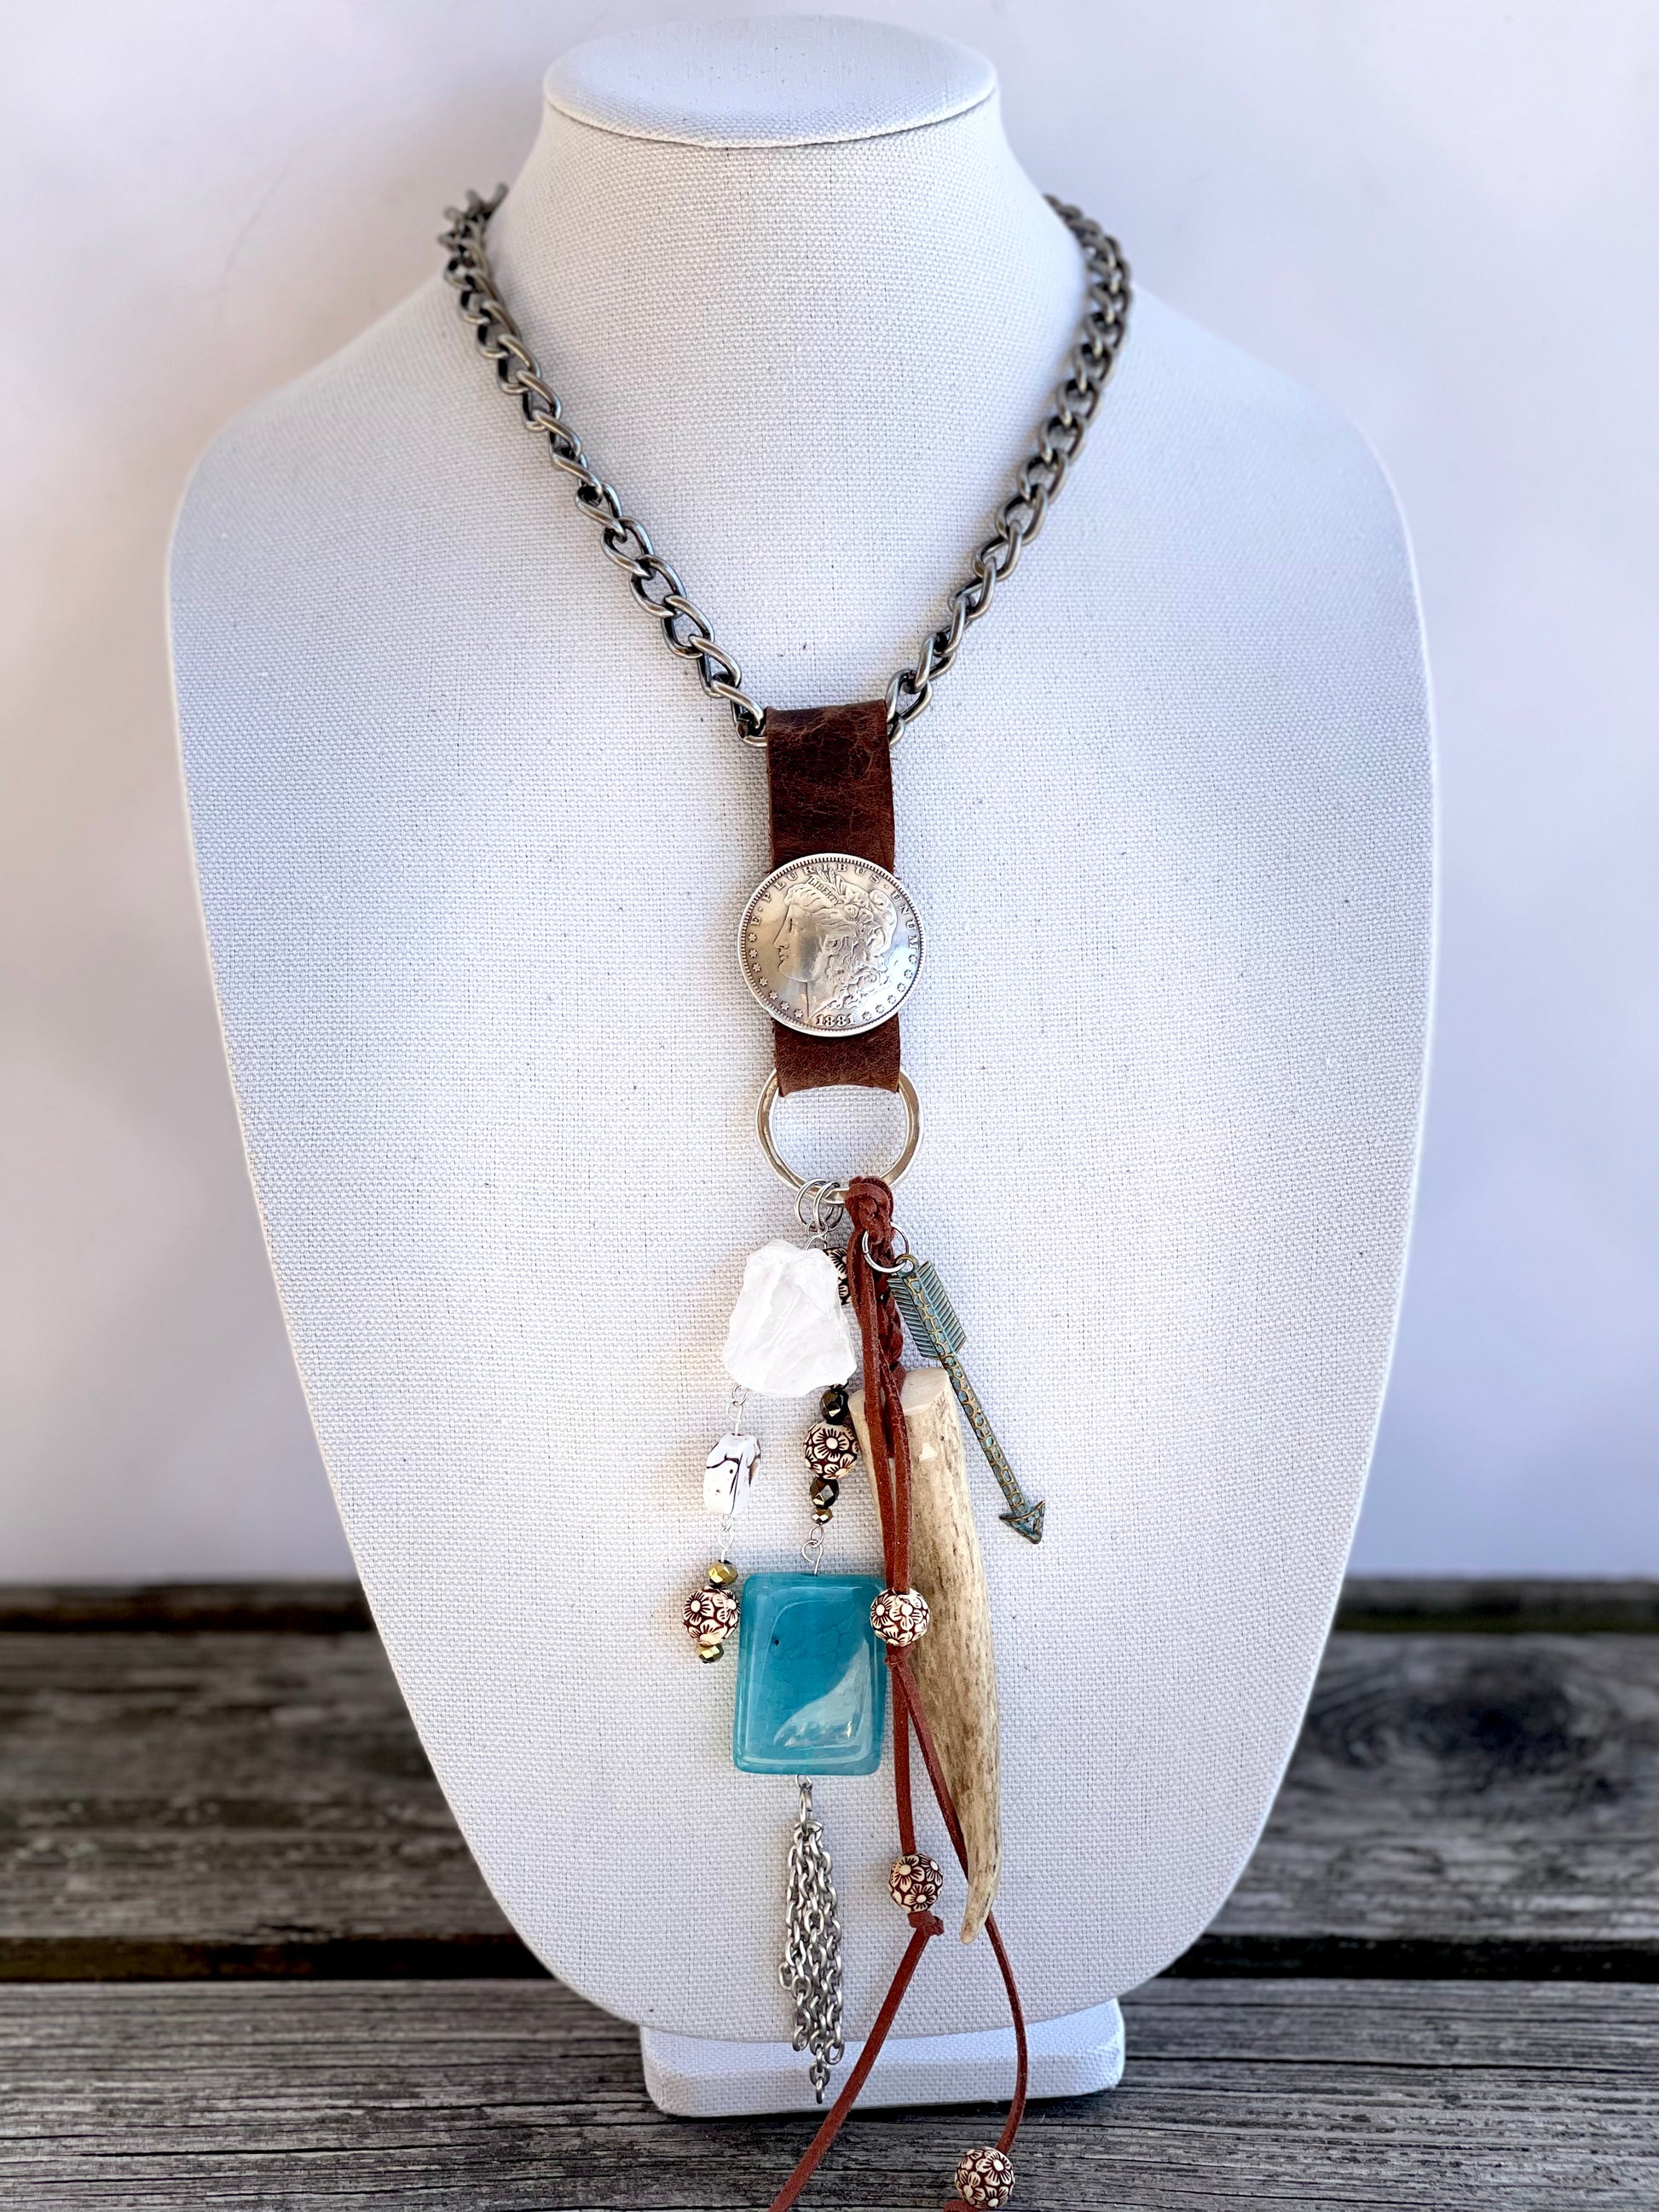 Limited Edition 1 of a kind Upcycled Leather chunky necklace with Deer Antler and other statement pieces - Patches Of Upcycling